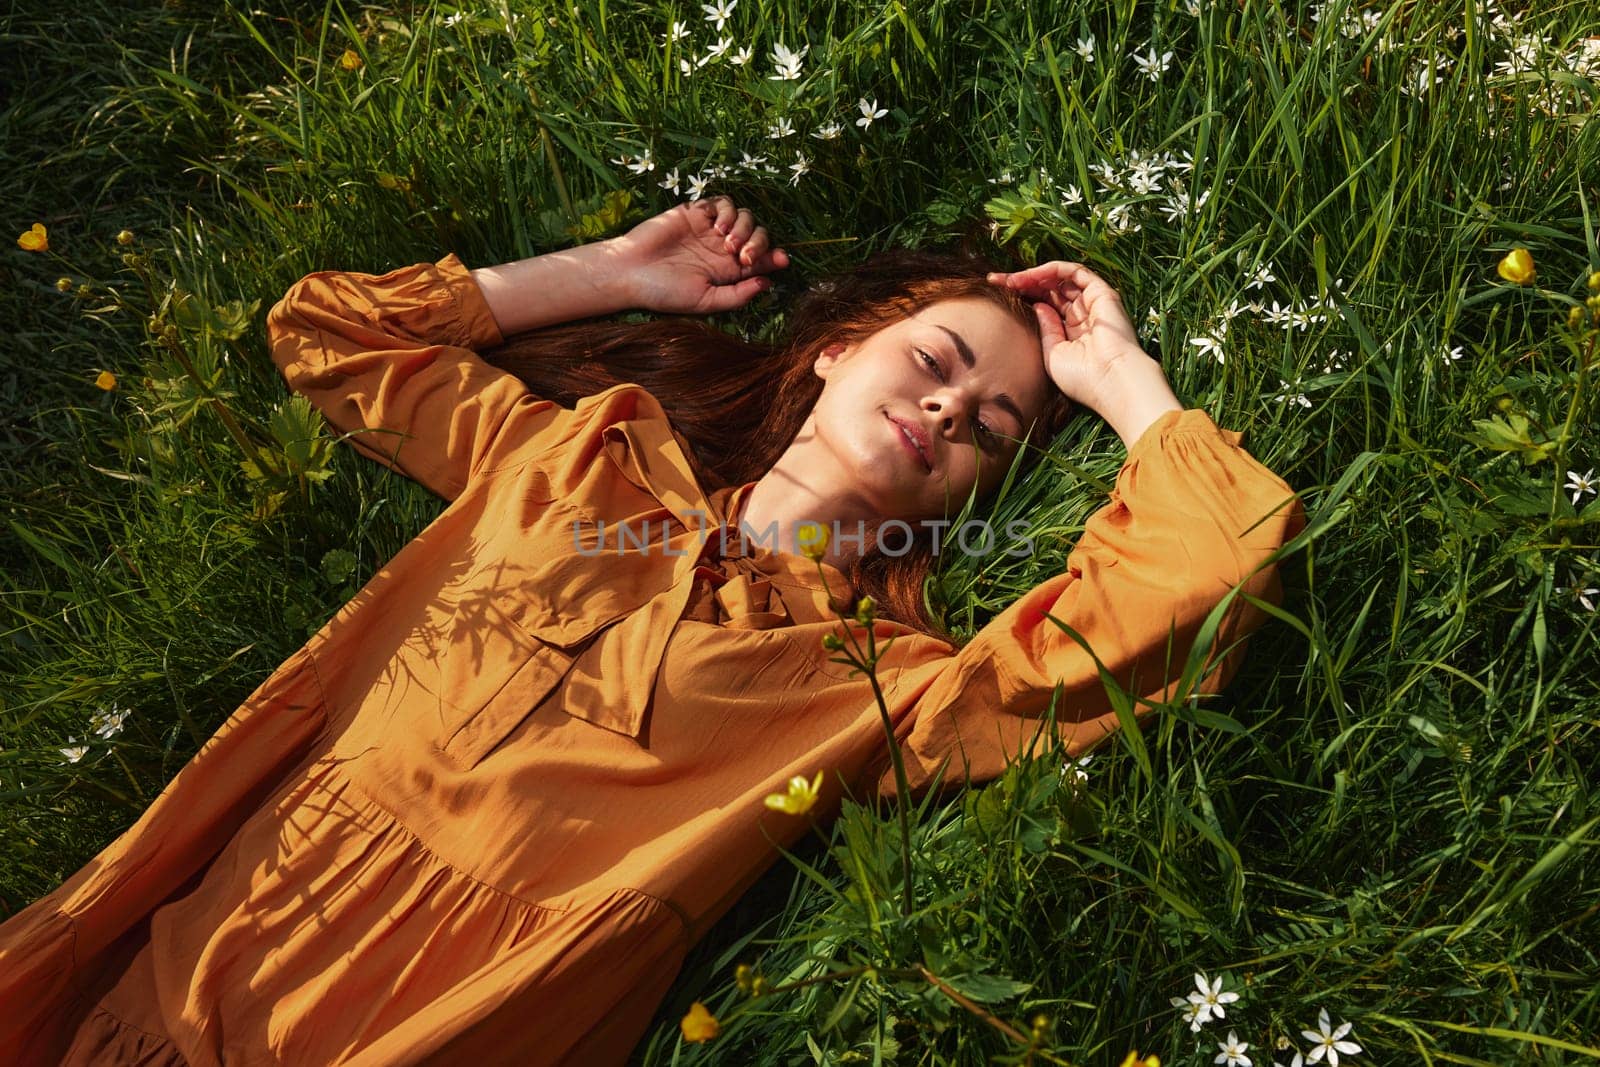 a happy, relaxed woman, resting lying in the green grass, in a long orange dress, with her eyes closed and a pleasant smile on her face, touching her face with her hand, and enjoying harmony with nature and recuperating. High quality photo